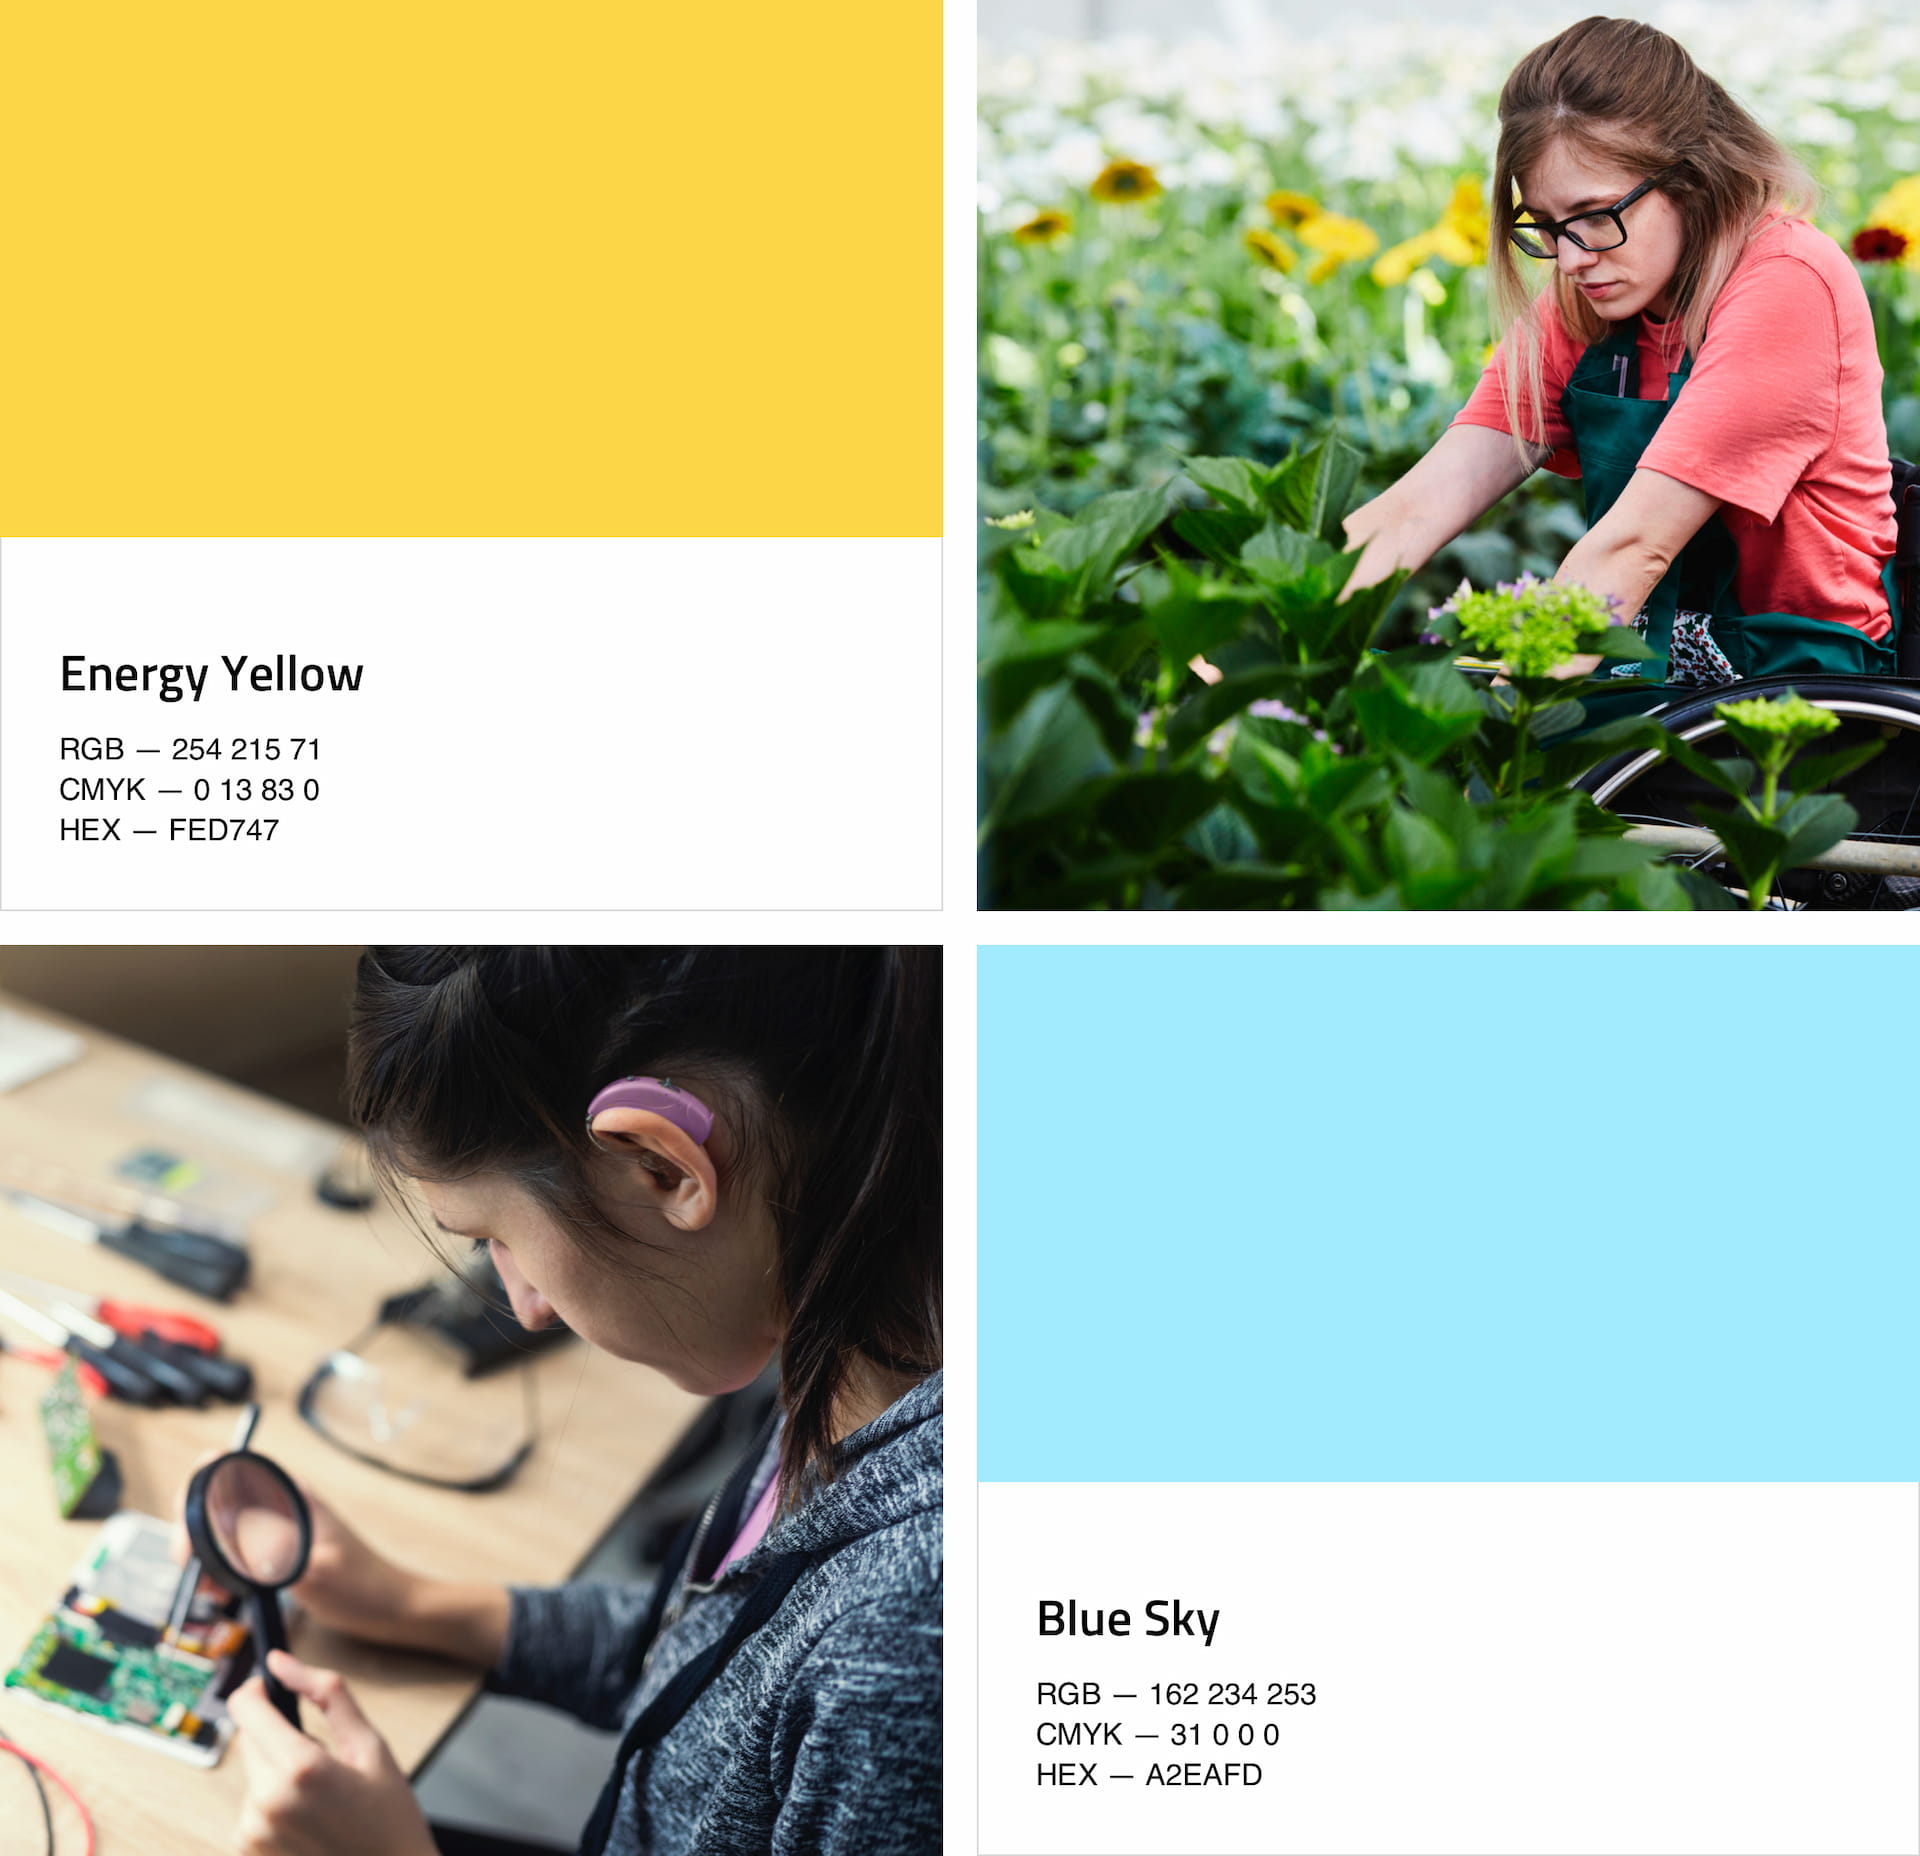 Image illustrating DB101 brand colors - energy yellow, light blue and picture style - showing people working in different places and using a little of blur in a background.